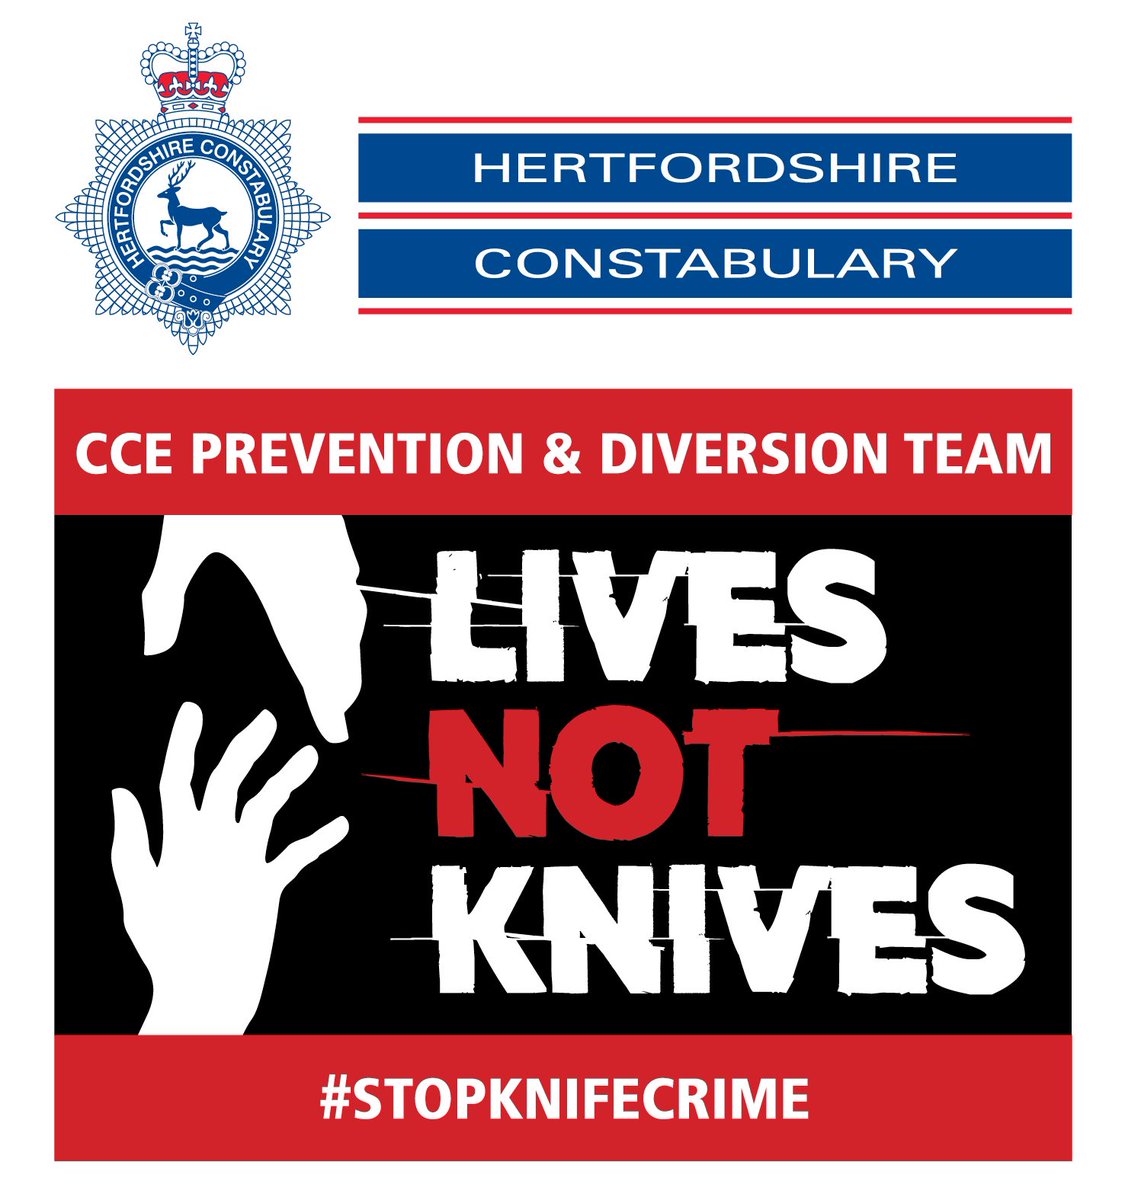 We are now known by our new name CCE Prevention and Diversion Team